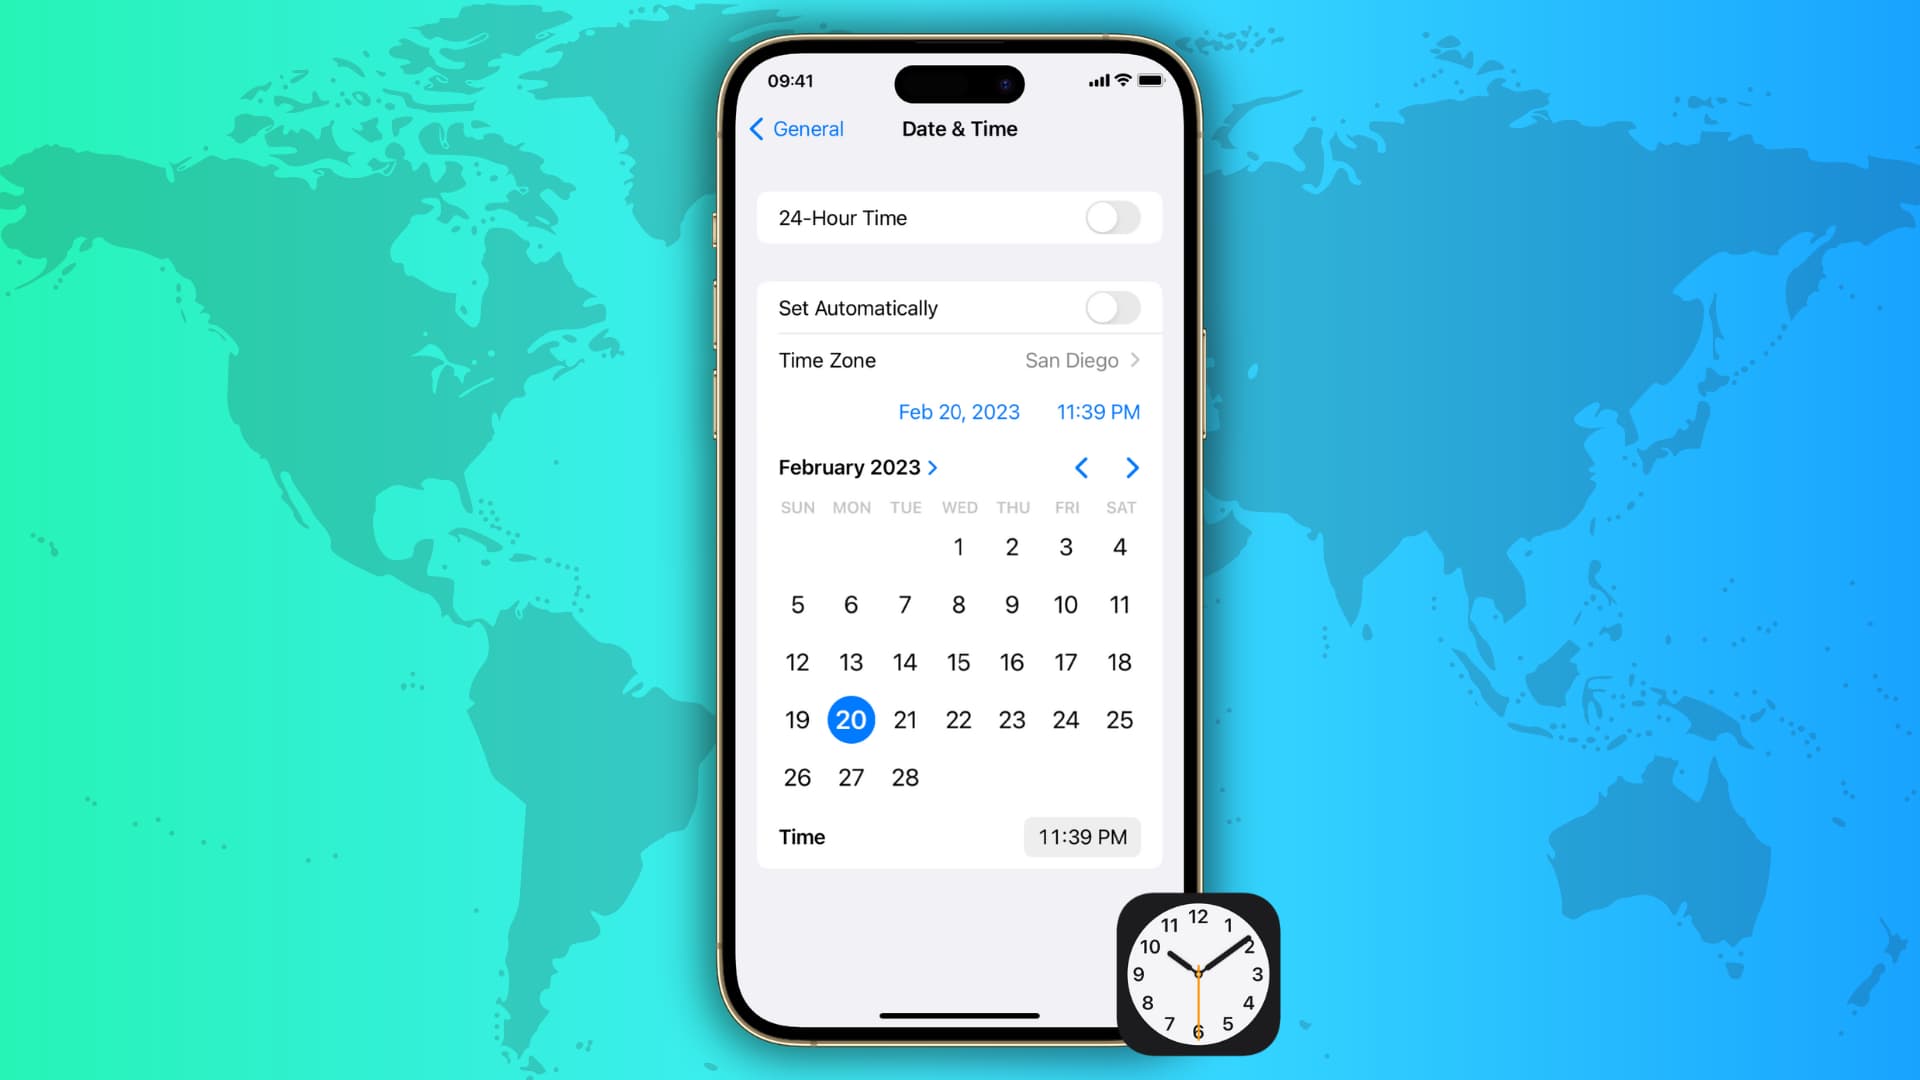 Illustration showing iPhone with date, time, and time zone settings on its screen with a world map in the background